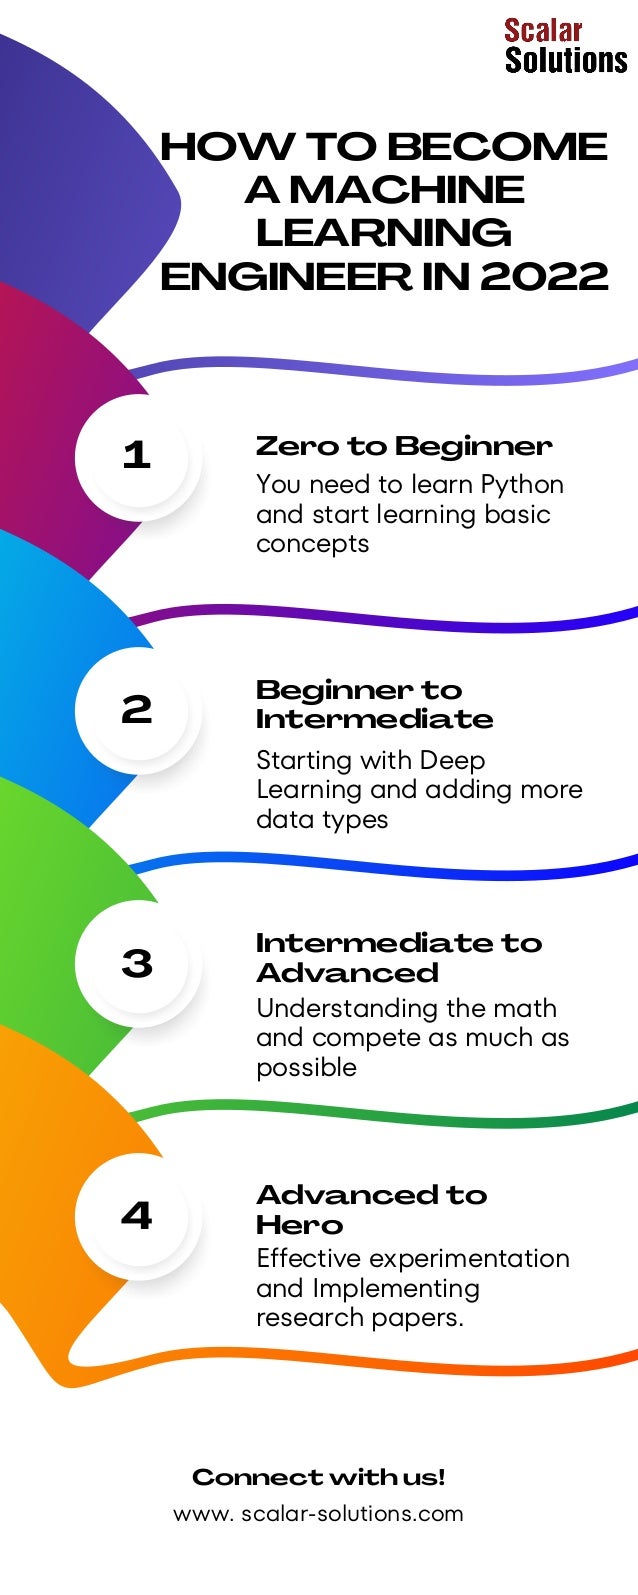 HOW TO BECOME
A MACHINE
LEARNING
ENGINEER IN 2022
You need to learn Python
and start learning basic
concepts
www. scalar-solutions.com
Connect with us!
Starting with Deep
Learning and adding more
data types
Understanding the math
and compete as much as
possible
Effective experimentation
and Implementing
research papers.
Zero to Beginner
Beginner to
Intermediate
Intermediate to
Advanced
Advanced to
Hero
1
2
3
4
 